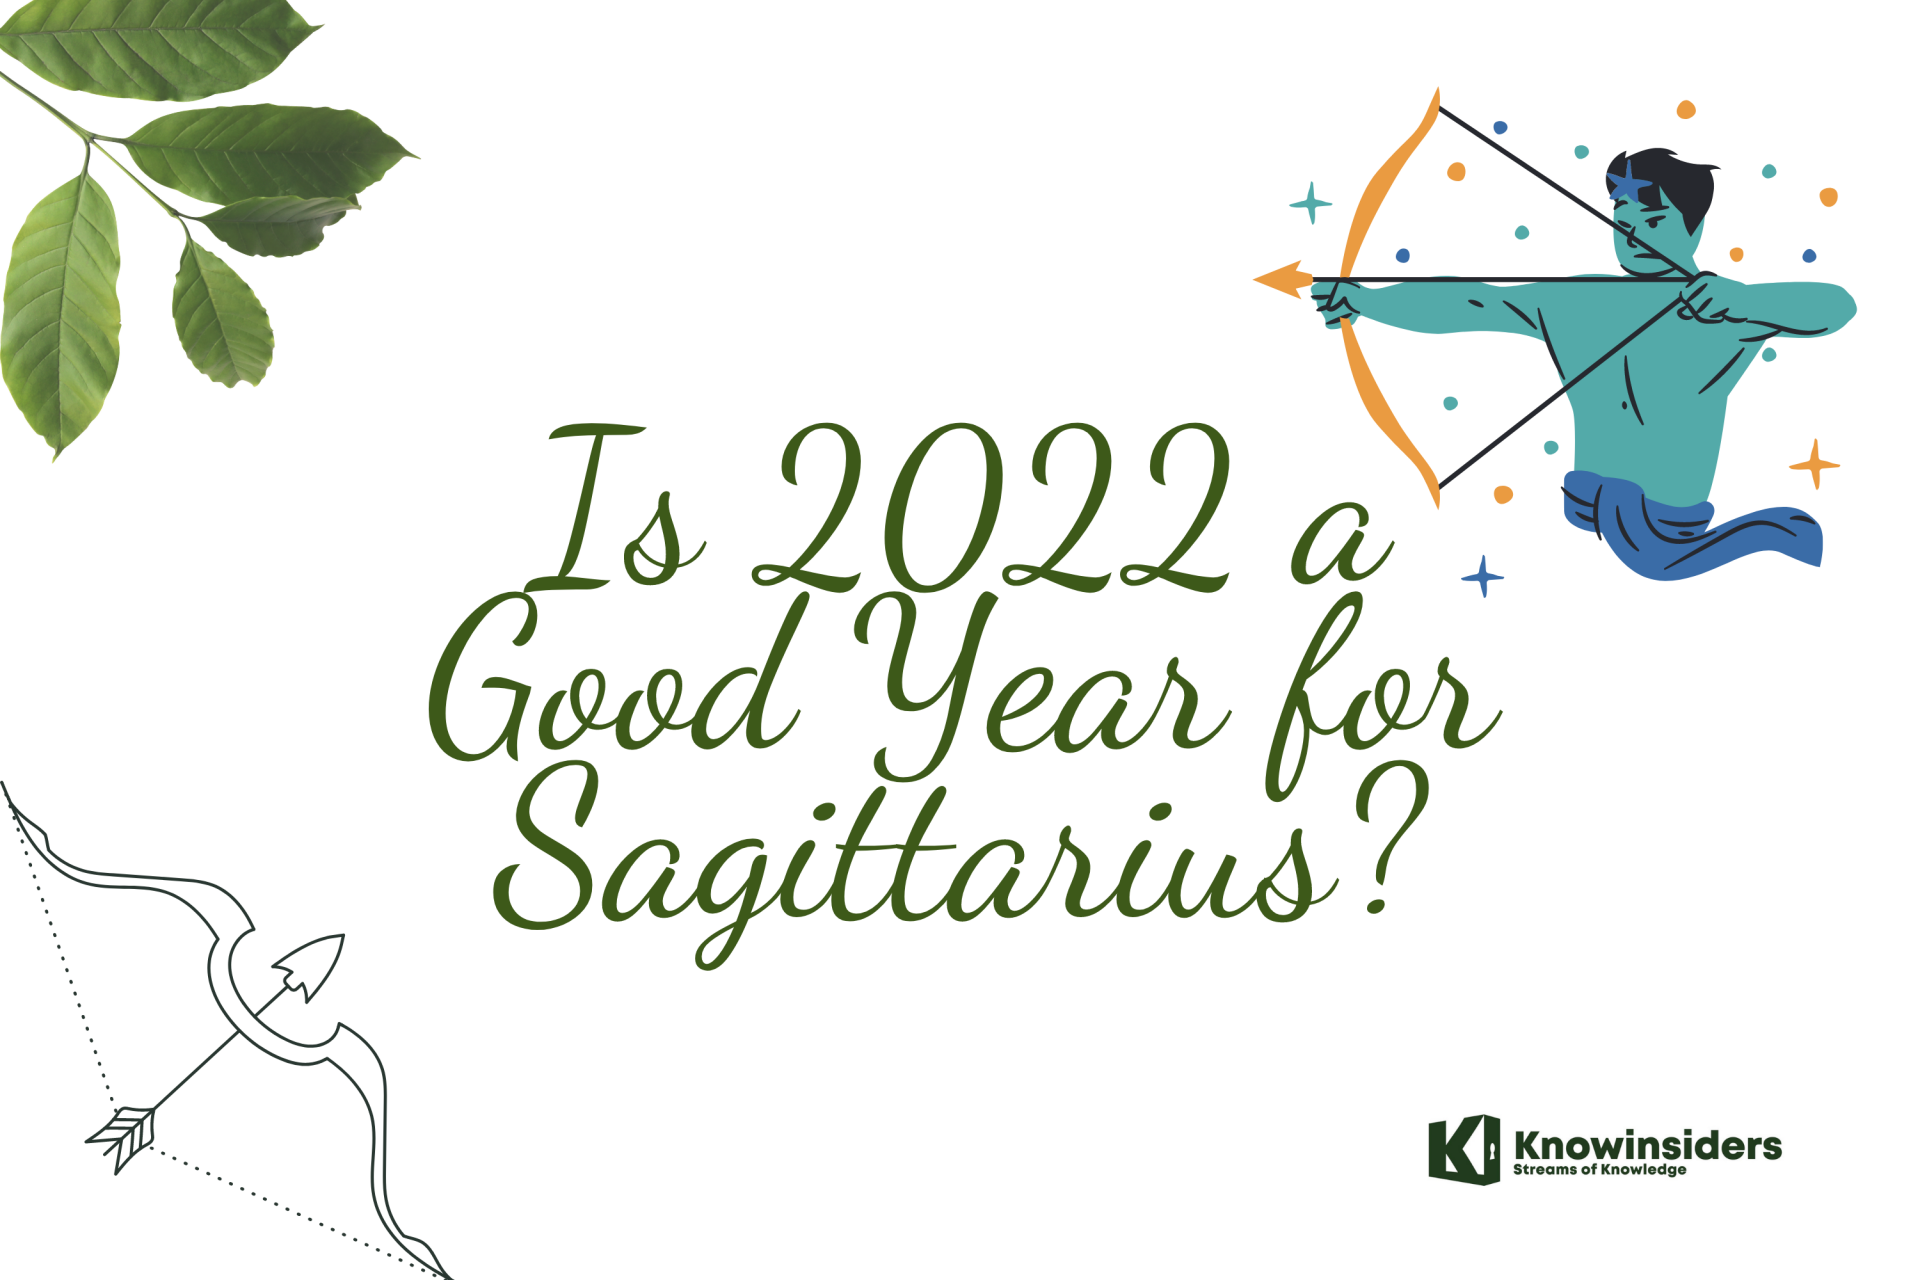 SAGITTARIUS March 2022 Horoscope: Monthly Prediction for Love, Career, Money and Health